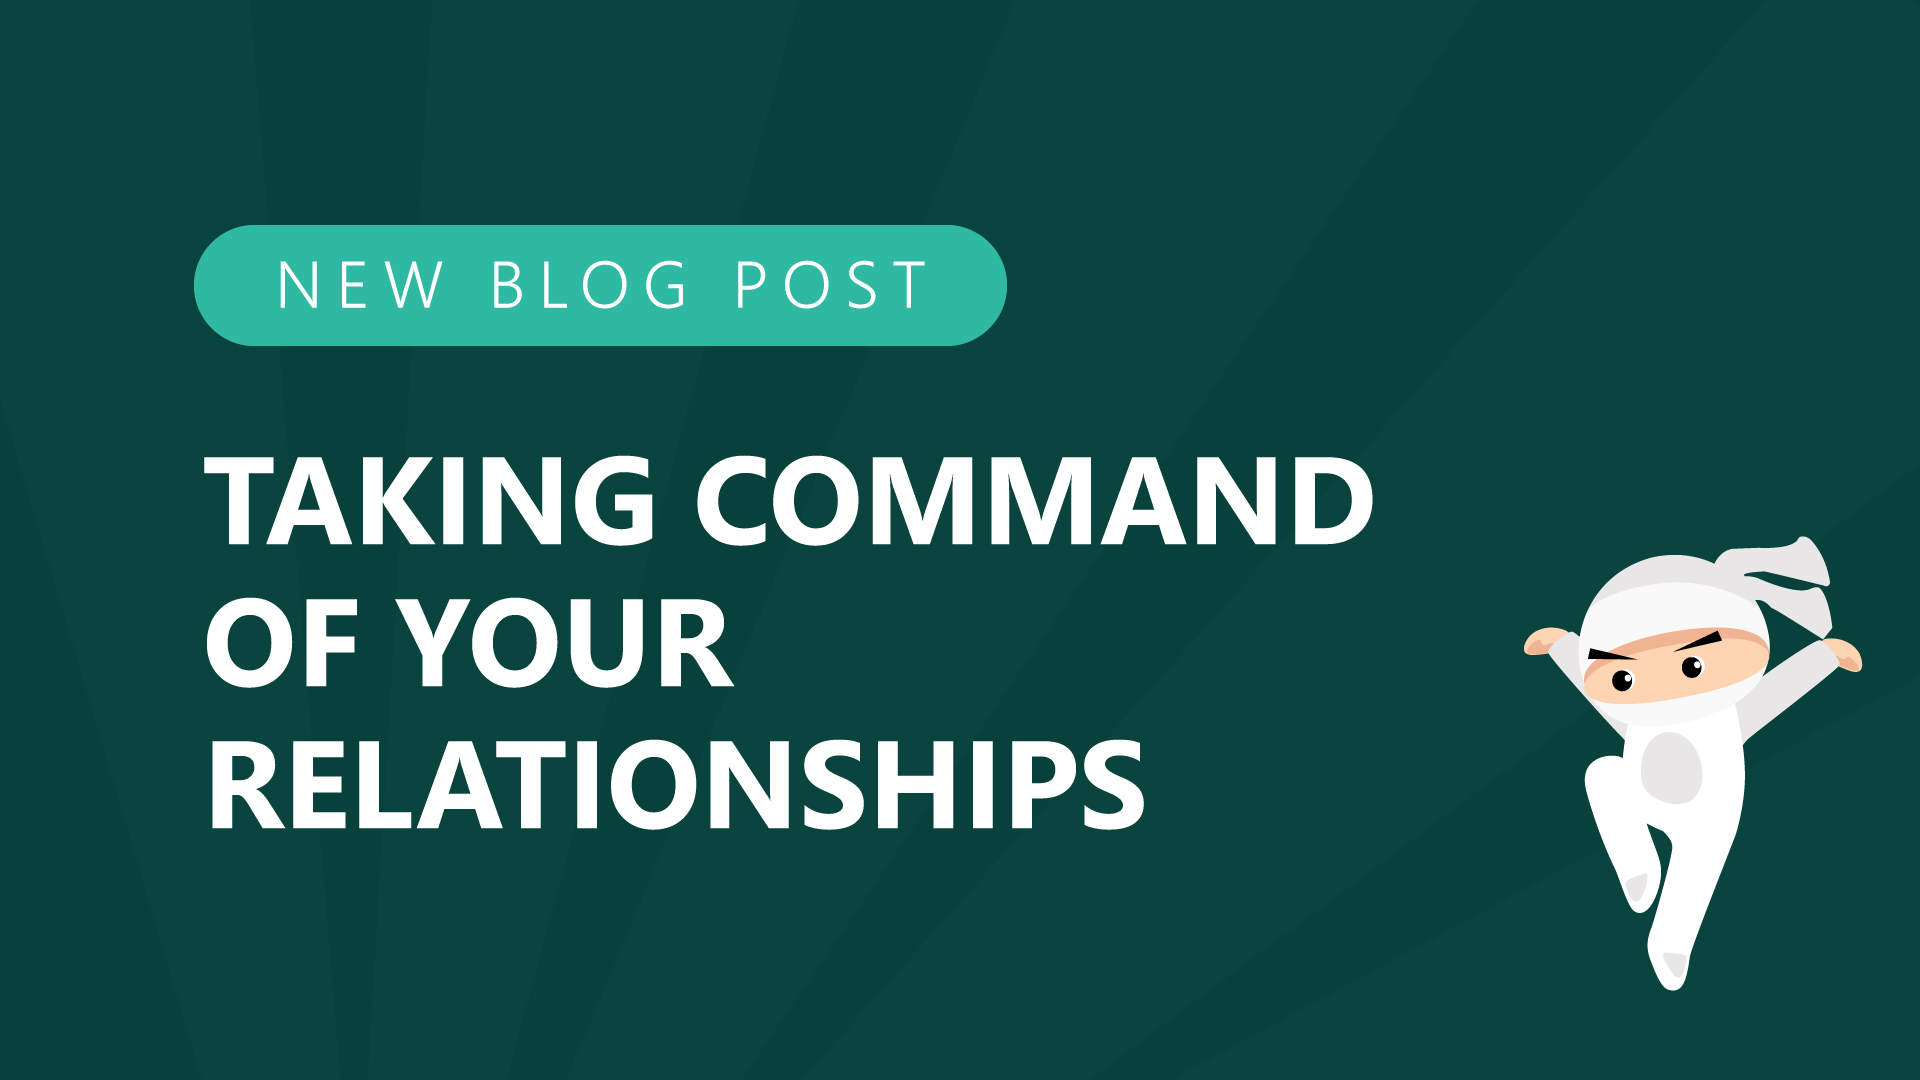 Taking command of your relationships